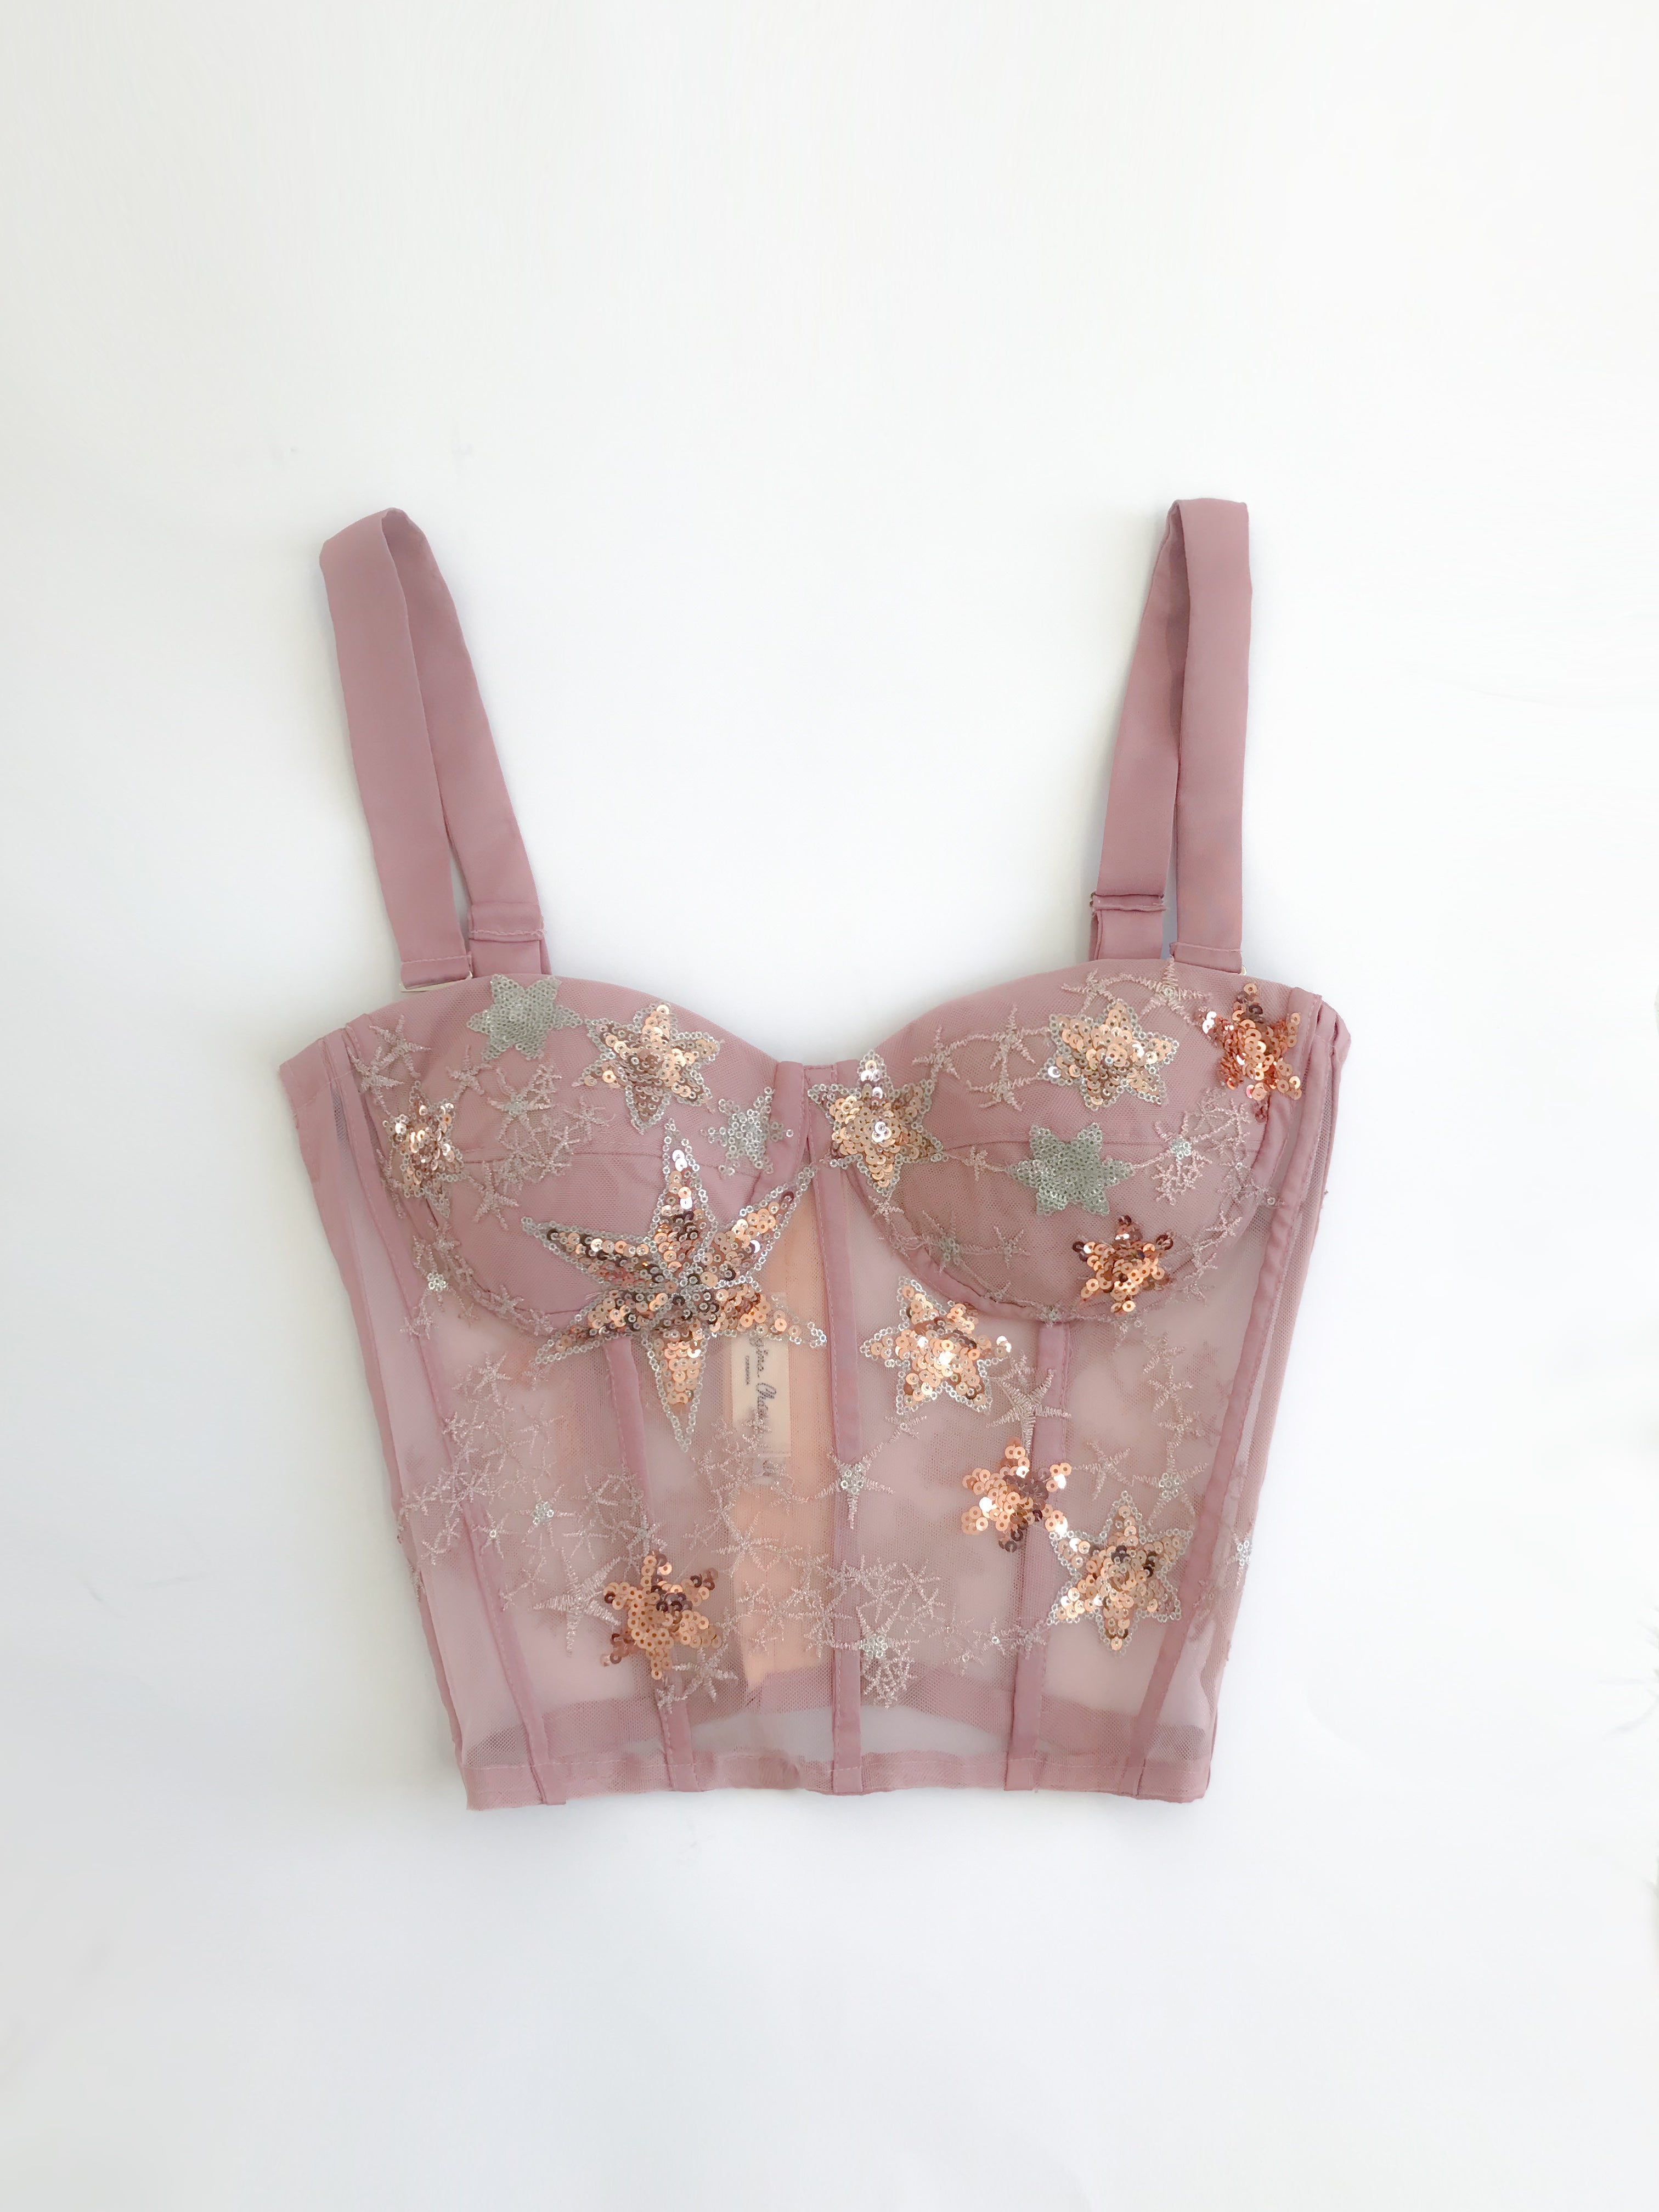 Old Rose Stars Long Bustier Removable Straps Size 8 Cup C IMMEDIATE SHIPPING/DELIVERY